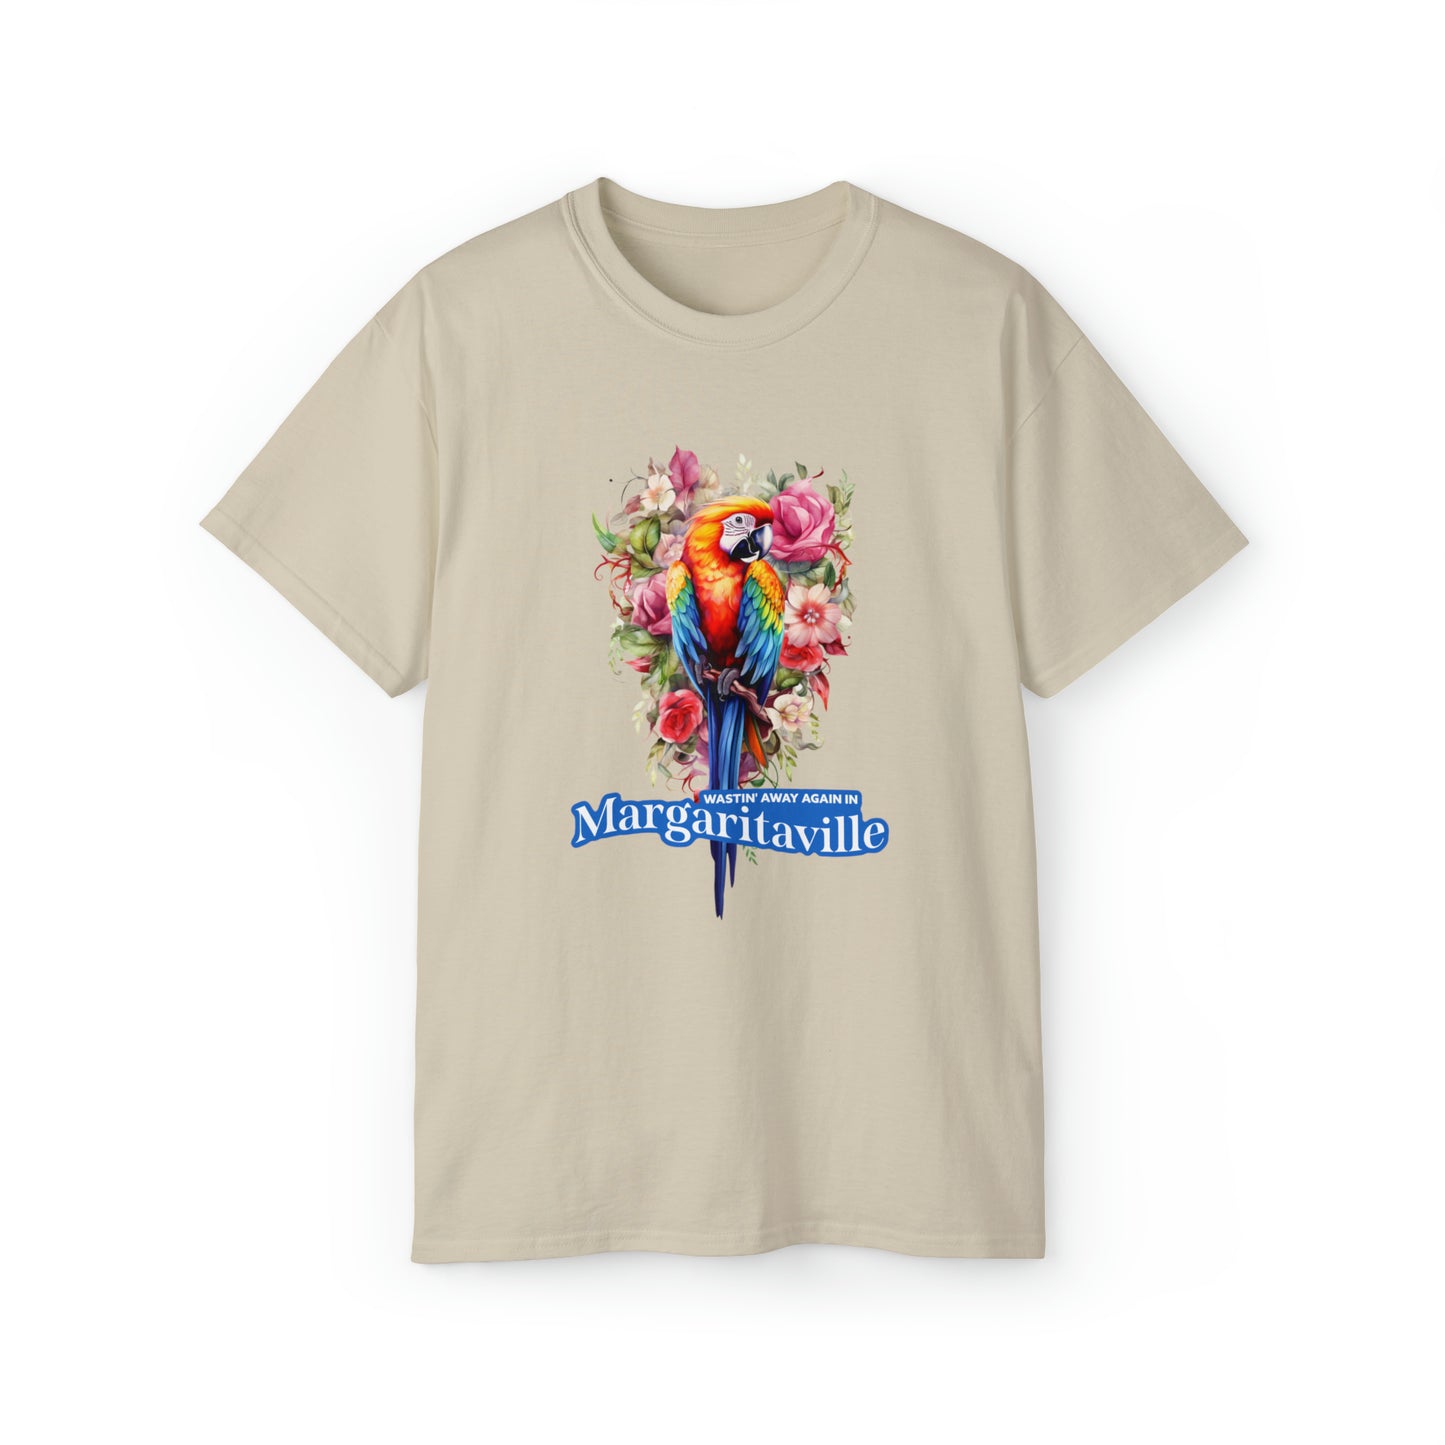 Jimmy Buffett's vibrant Margaritaville Tribute T-Shirt. A colorful parrot design makes this tee a must-have for Parrotheads.